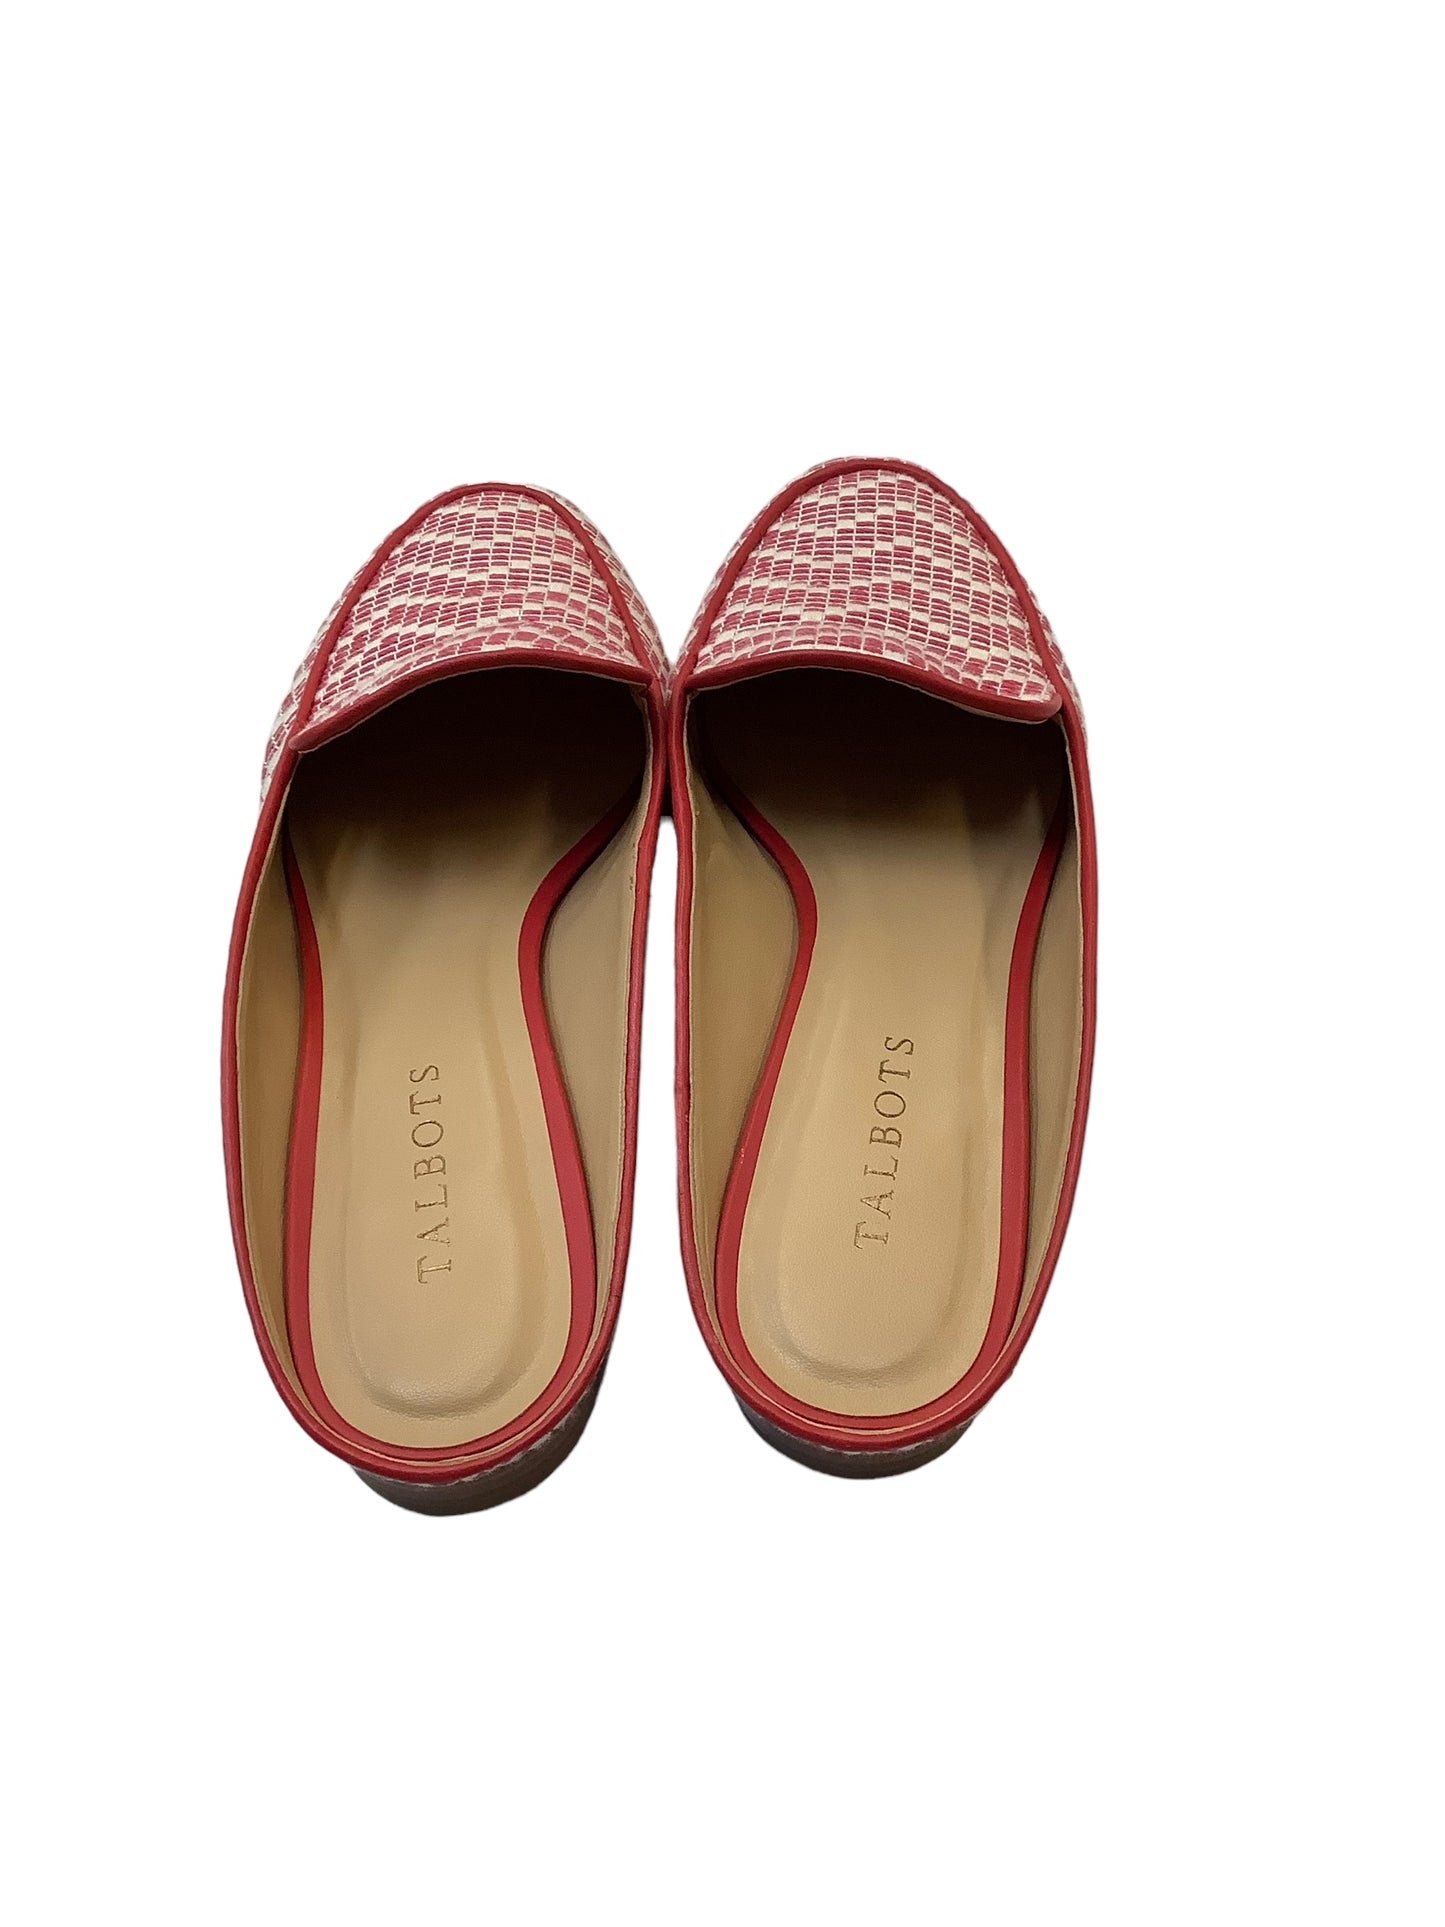 Shoes Flats By Talbots  Size: 8.5